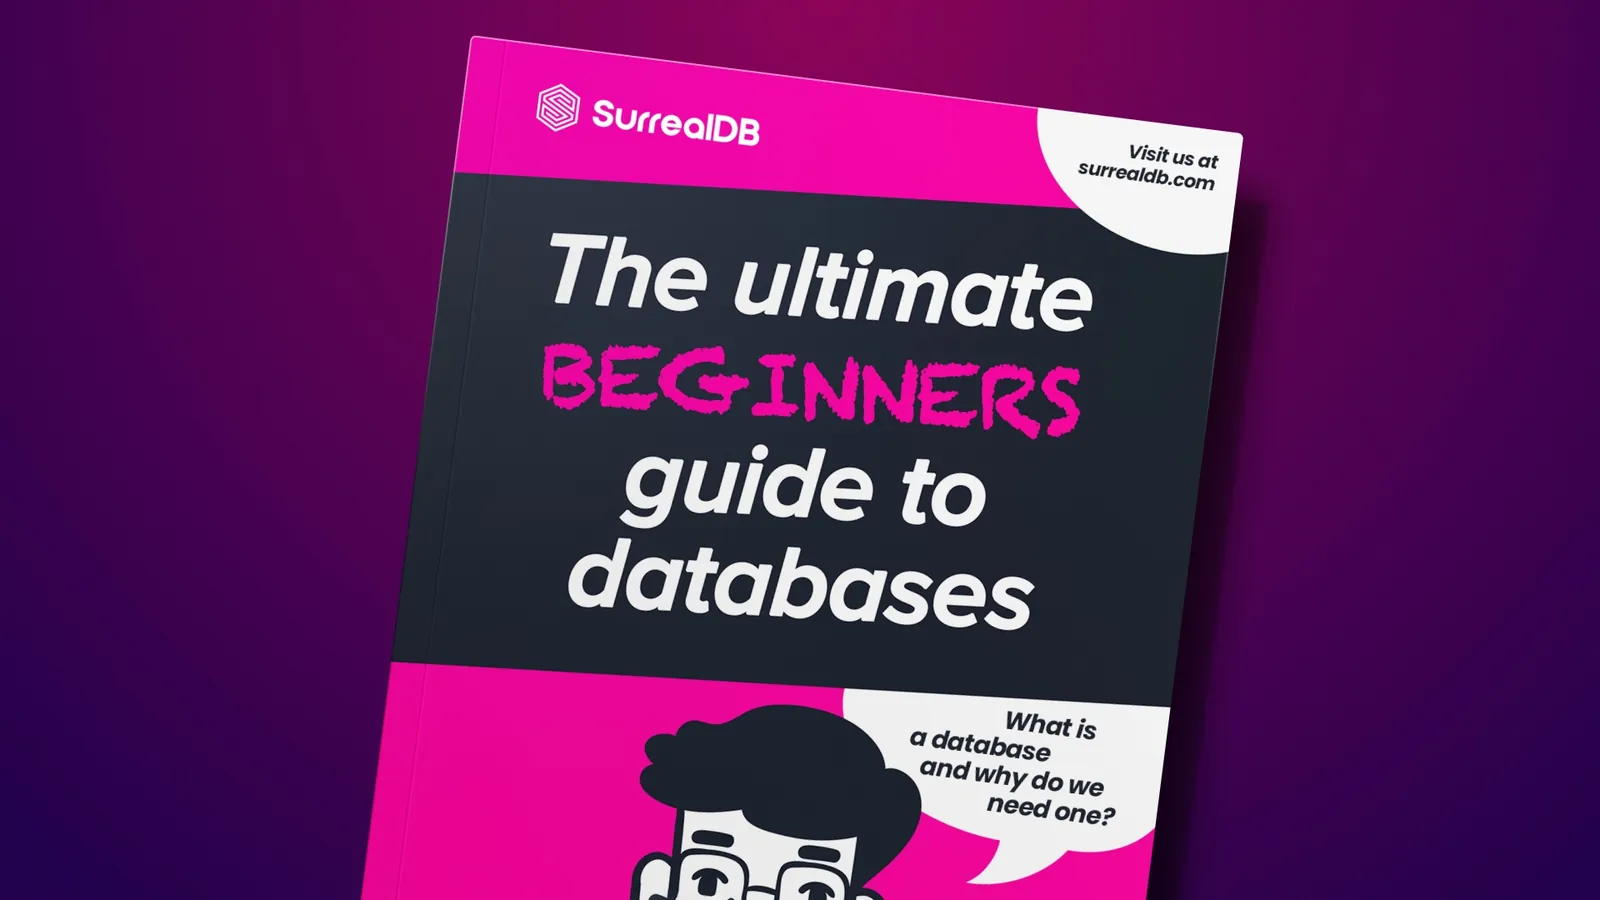 The ultimate beginners guide to databases